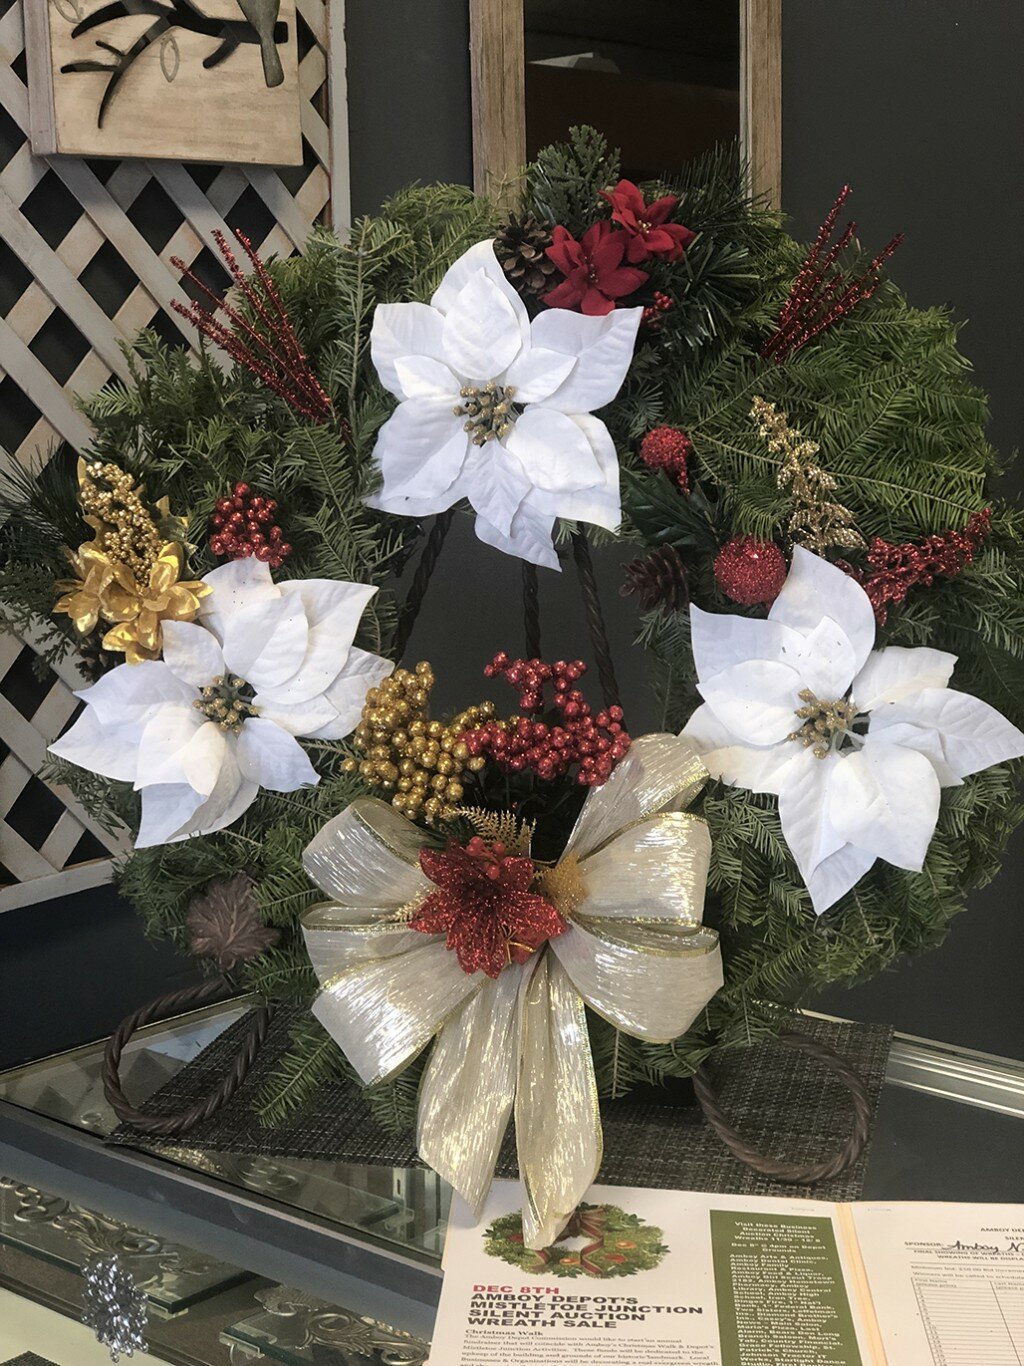 Pictured is the wreath located at the Amboy News and Main Street Hair Salon. Bidding begins on Nov. 30.